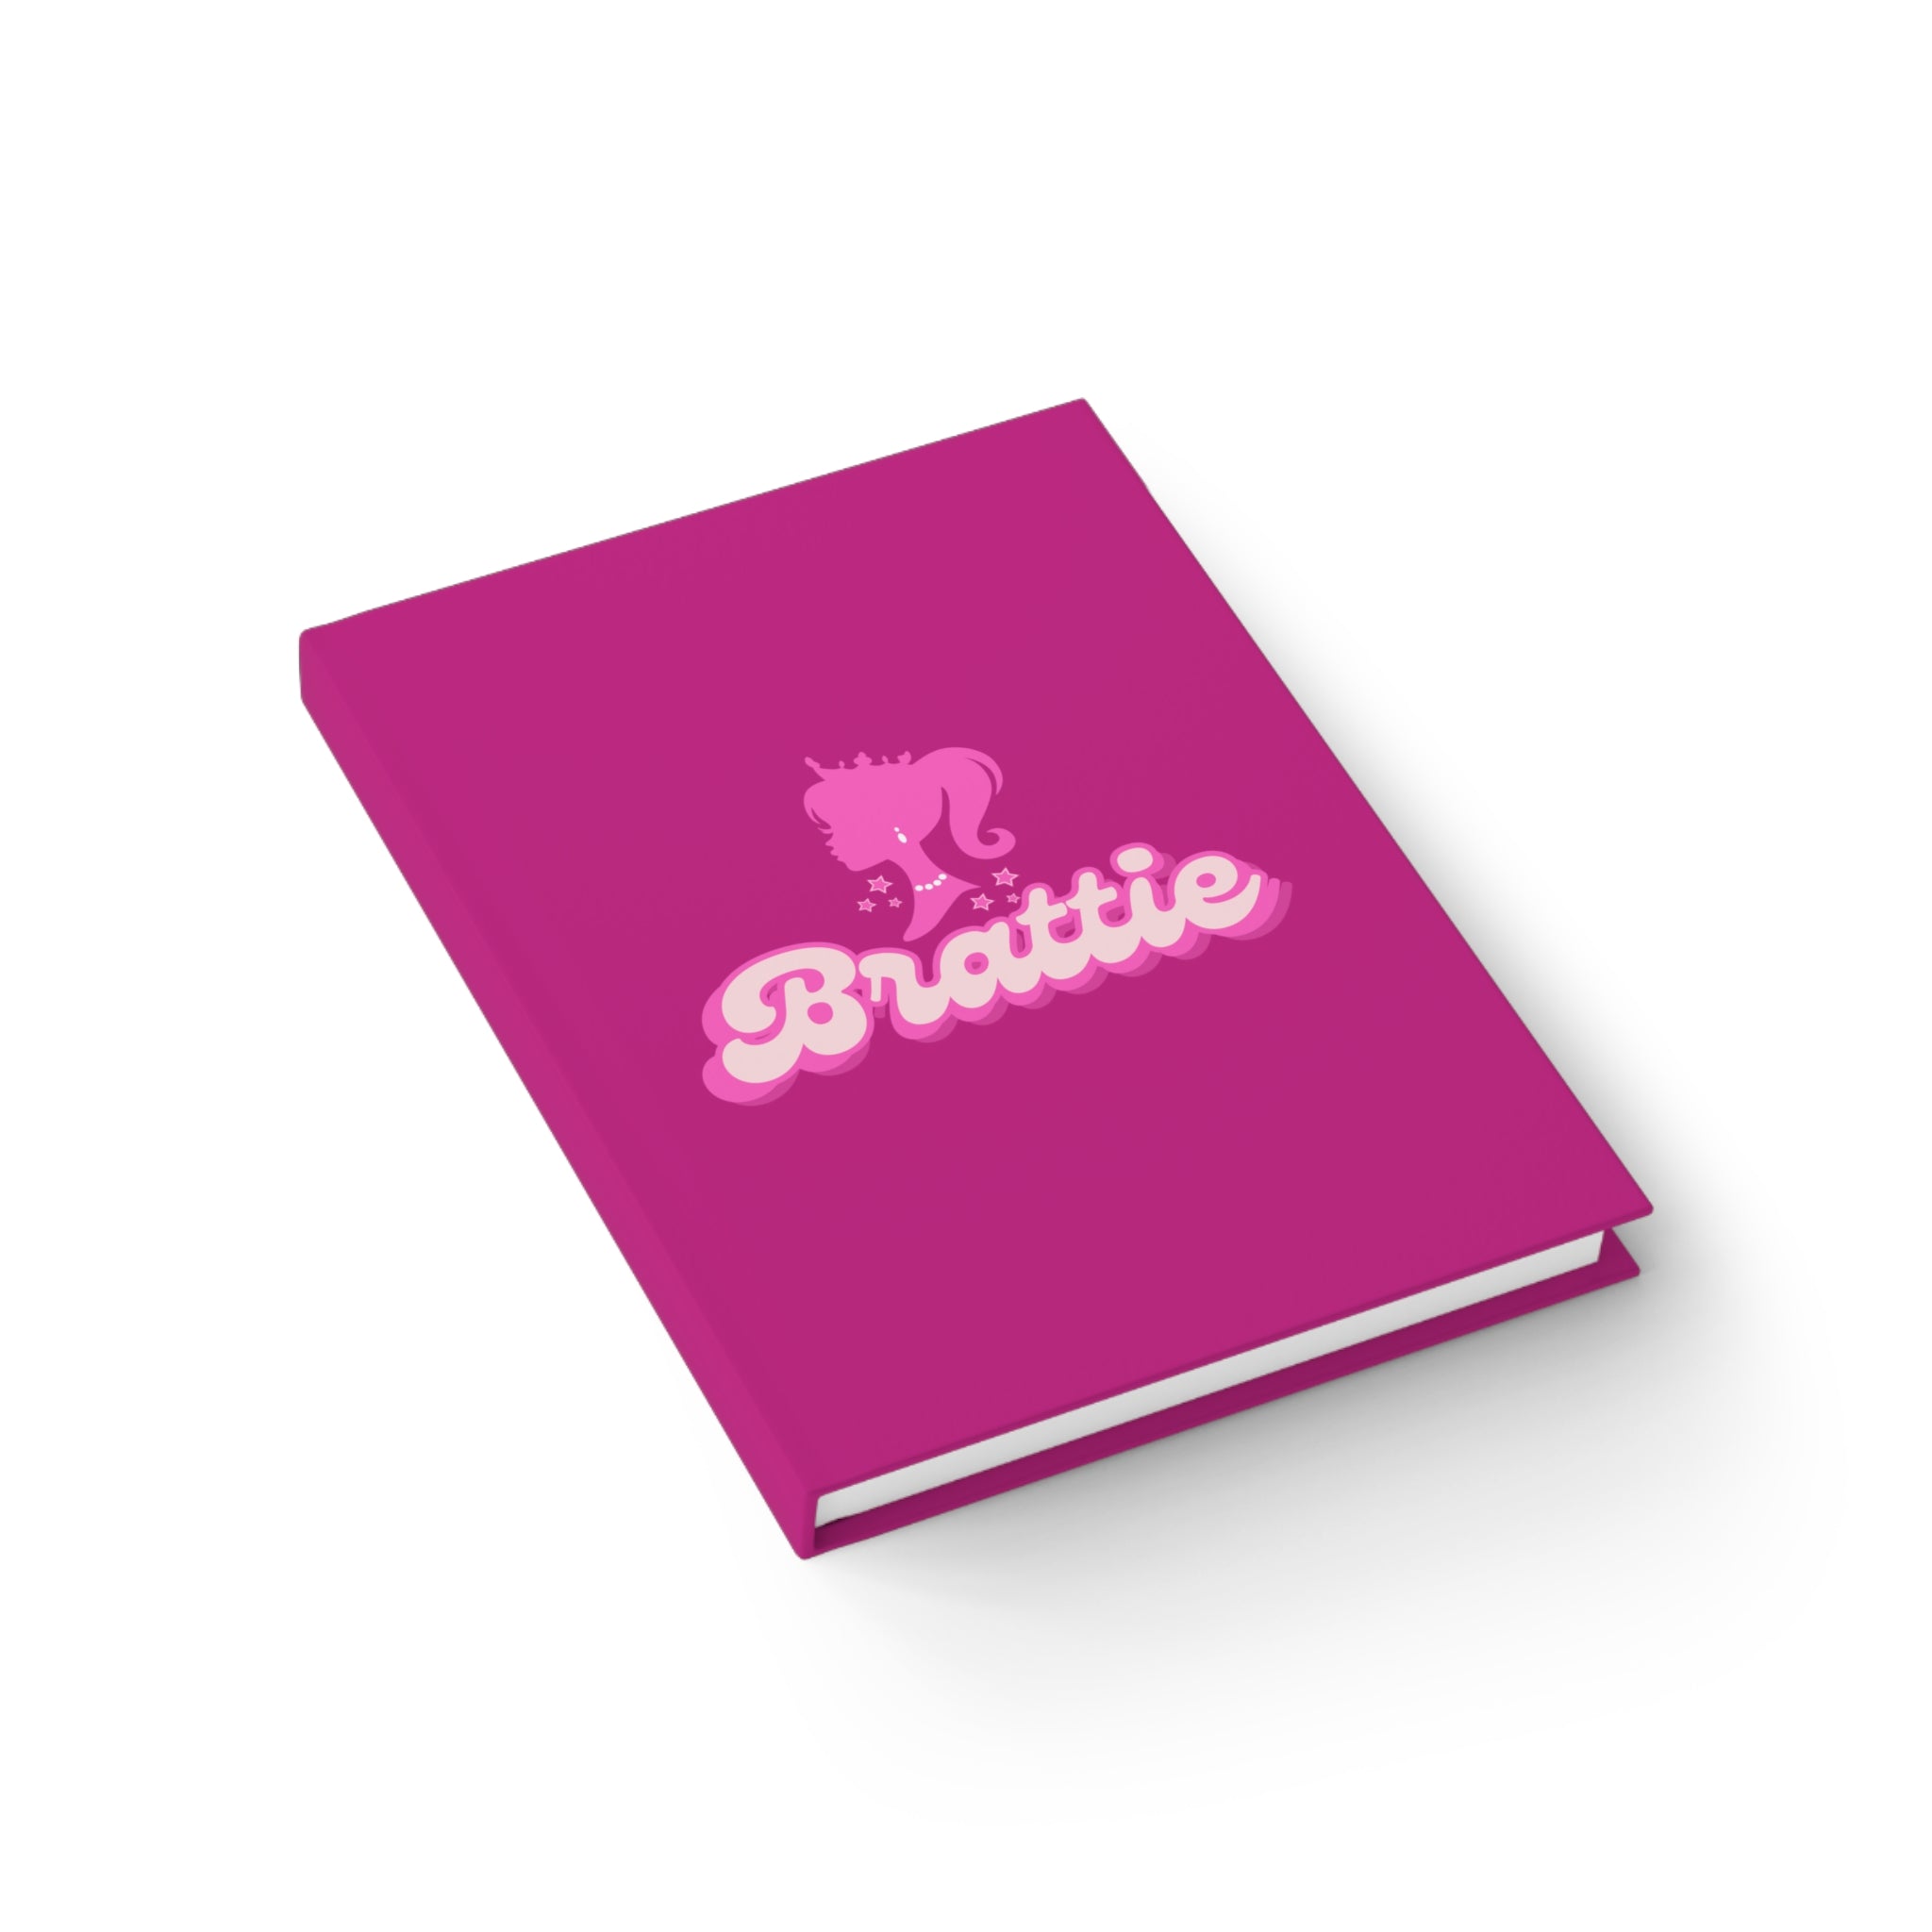 Bright Pink "Brattie" Silhouette Journal - Ruled Line, Lined Notebook, Gratitude Journal